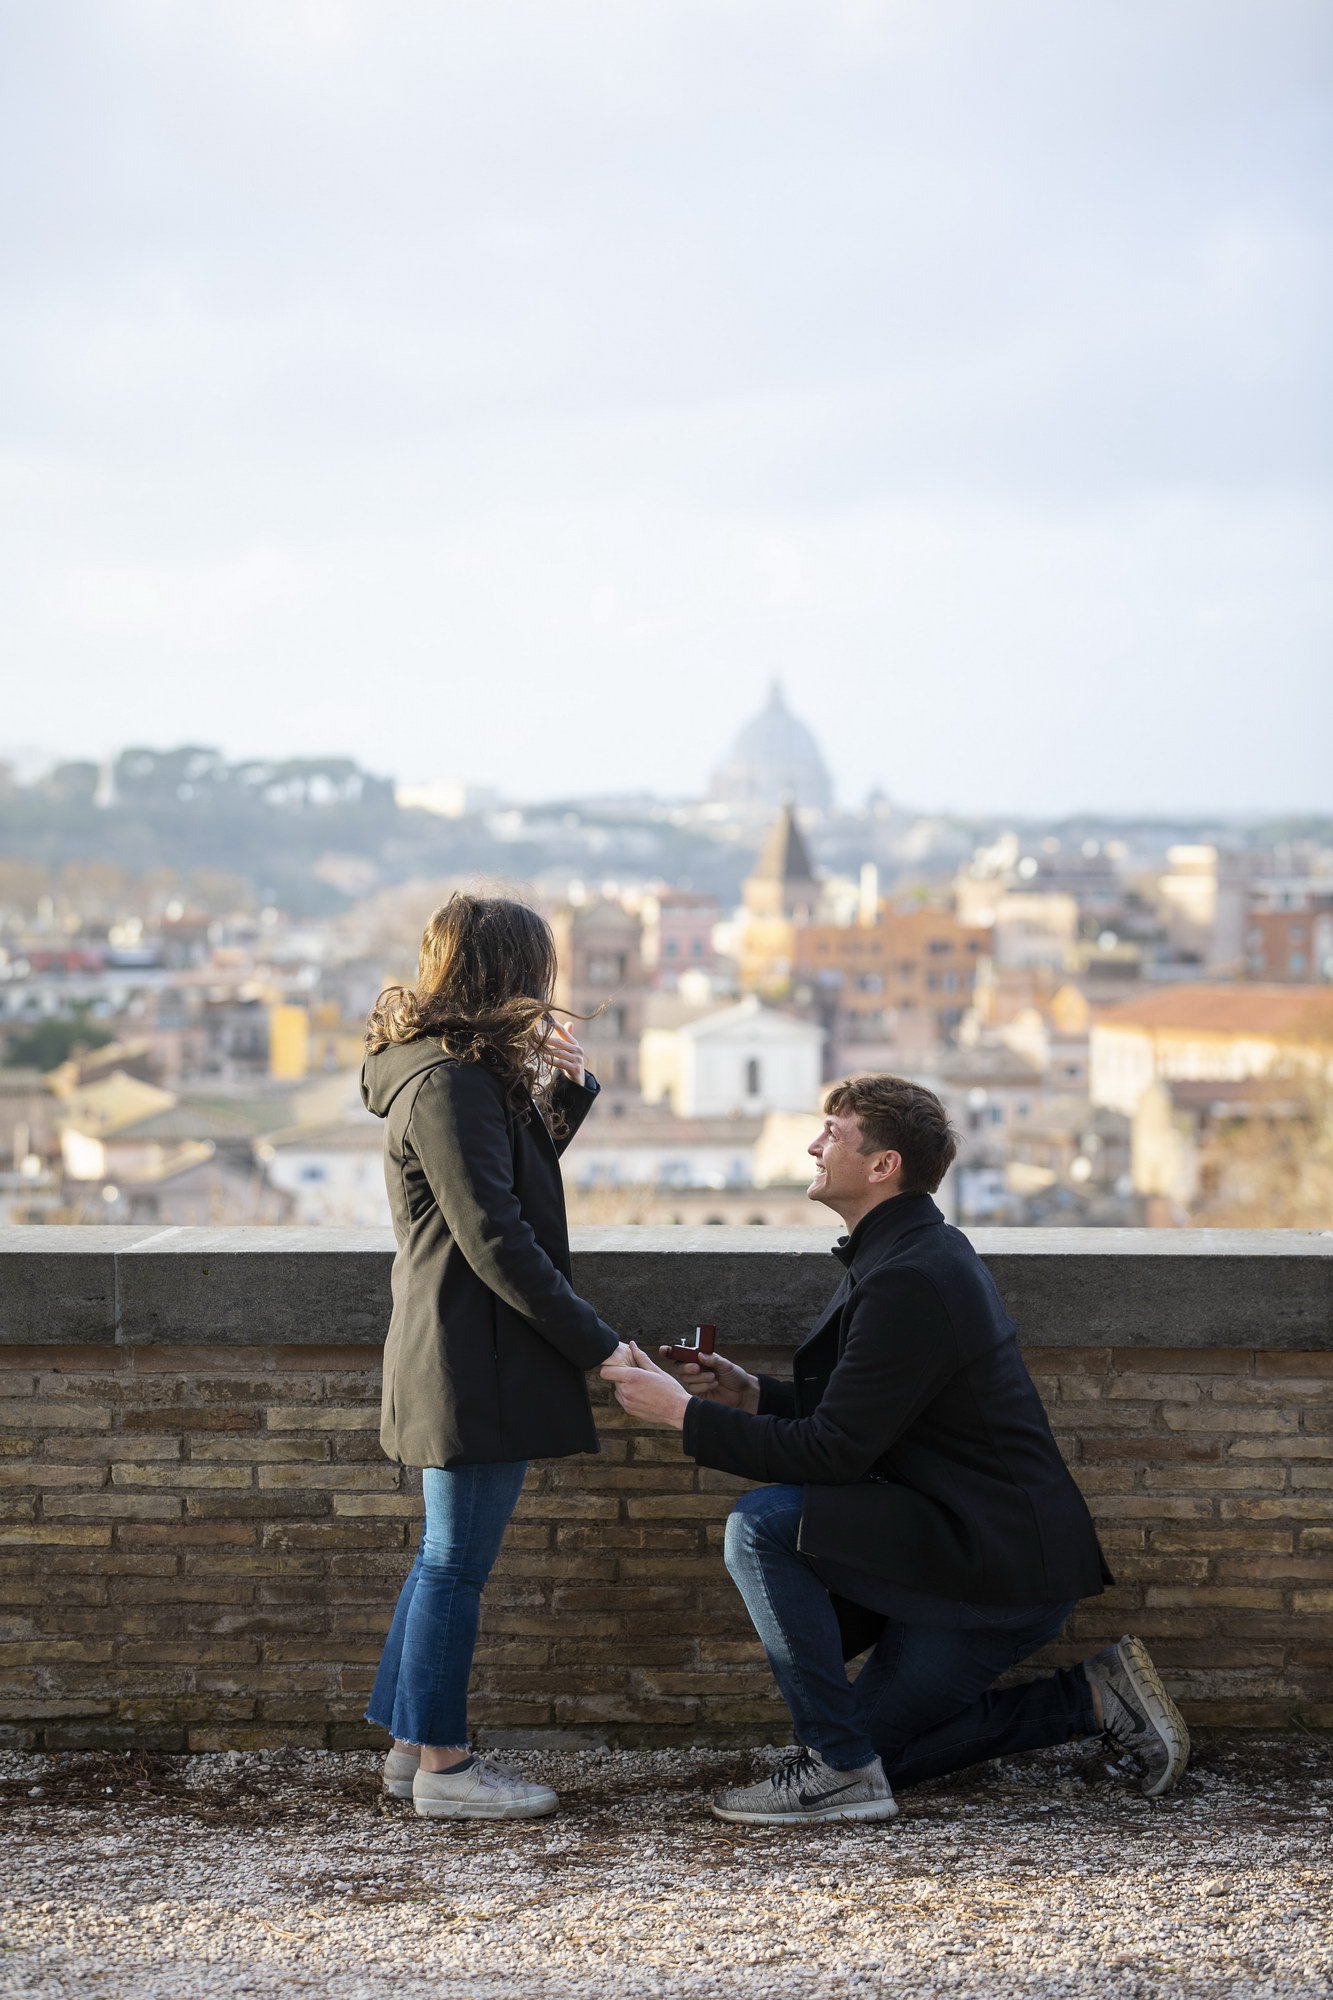 Christmas Engagement Proposal in Rome Andrea Matone01